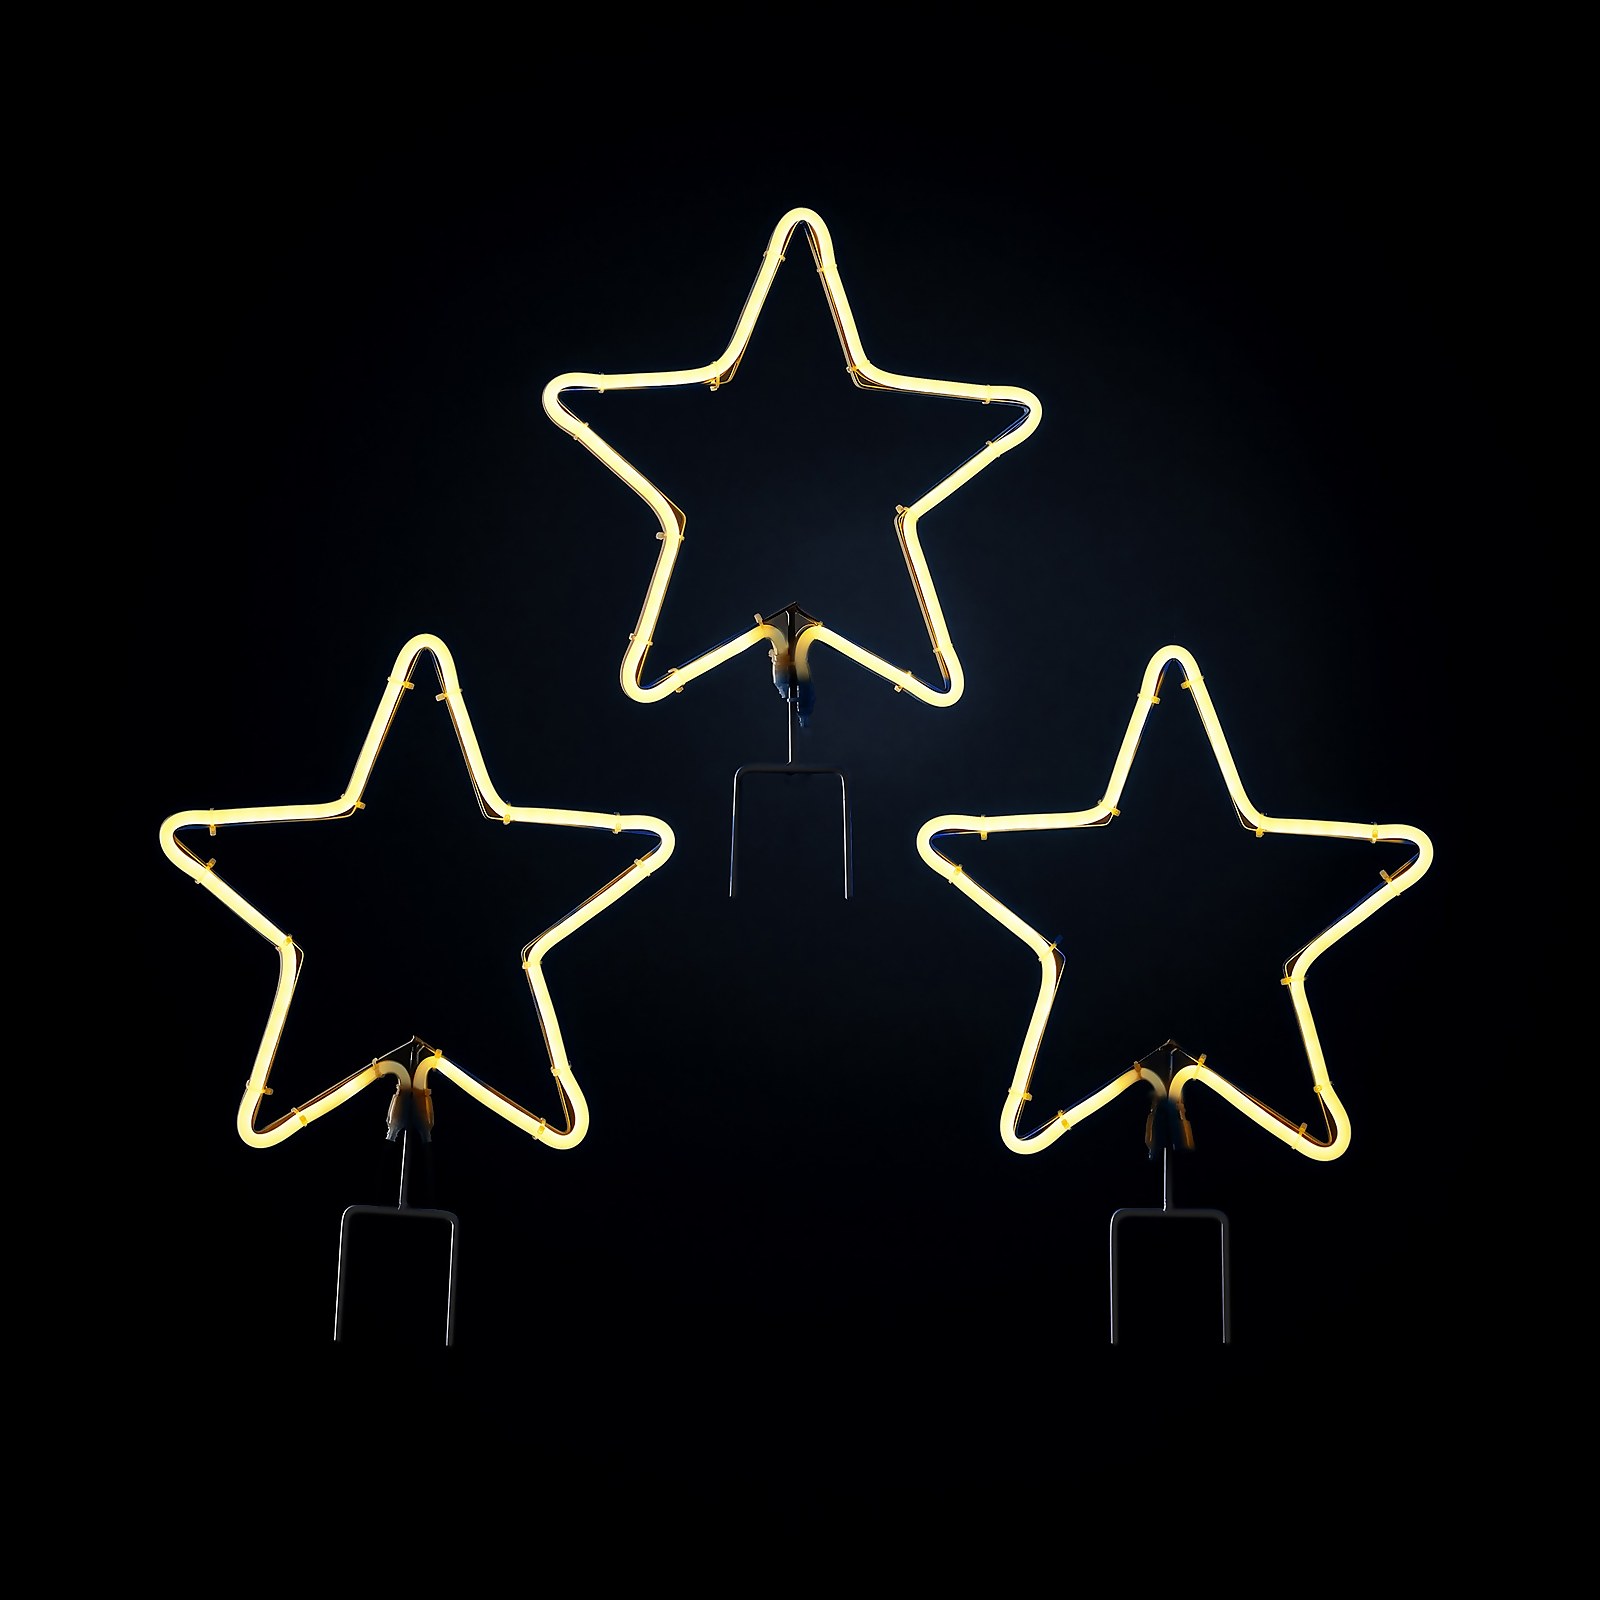 Photo of Neon Star Led Christmas Stake Lights - Pack Of 3